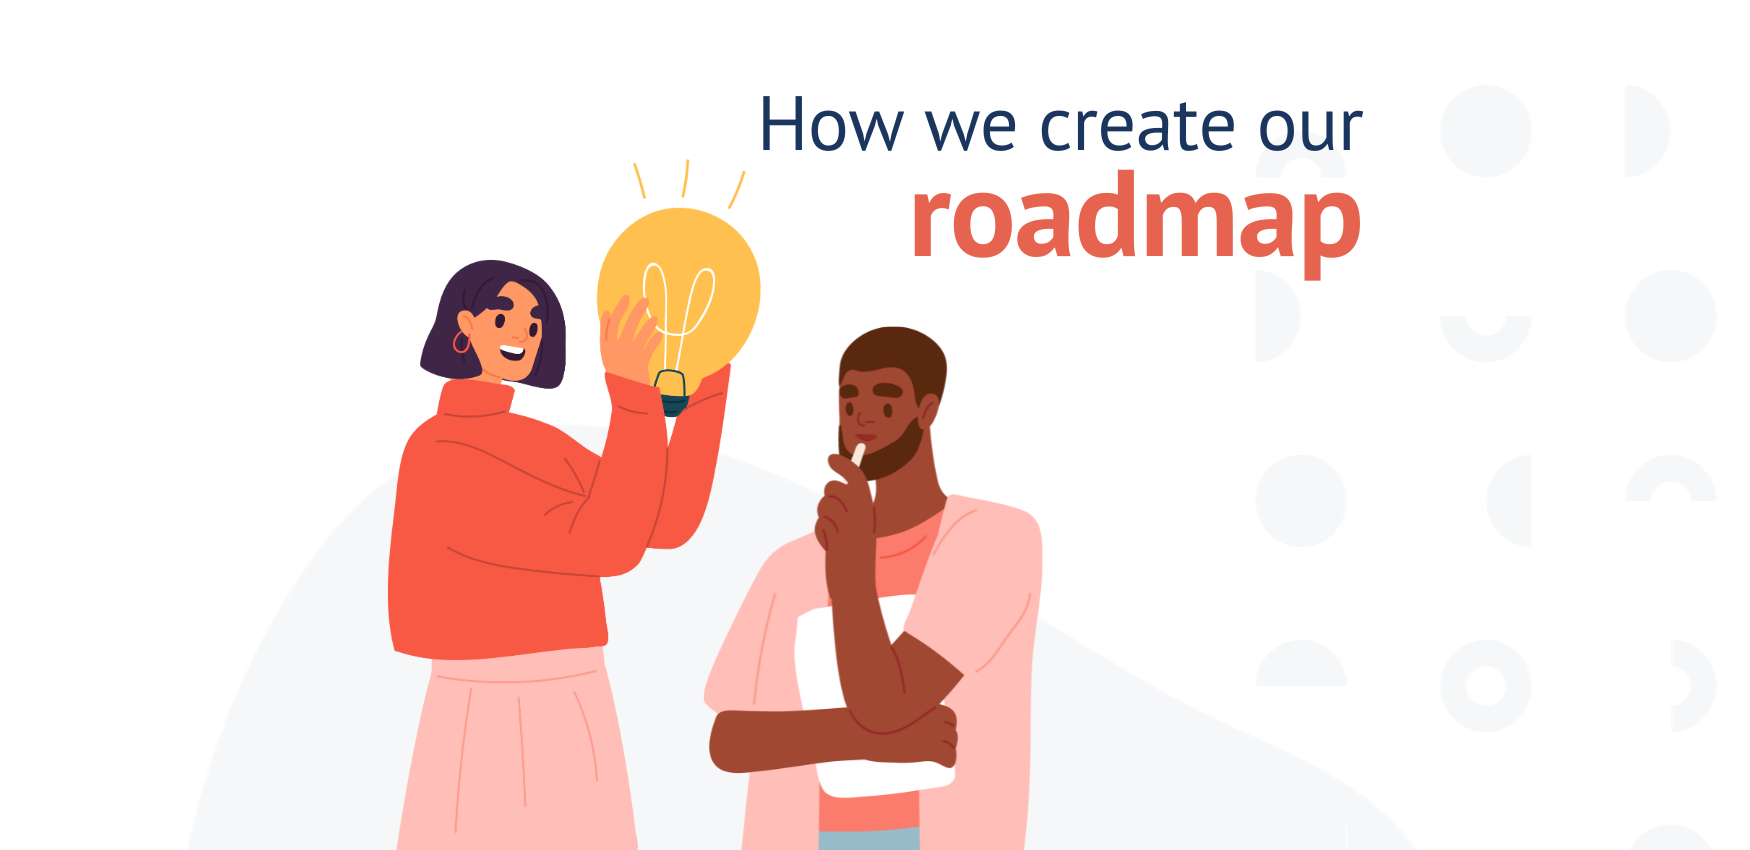 How we create our roadmap